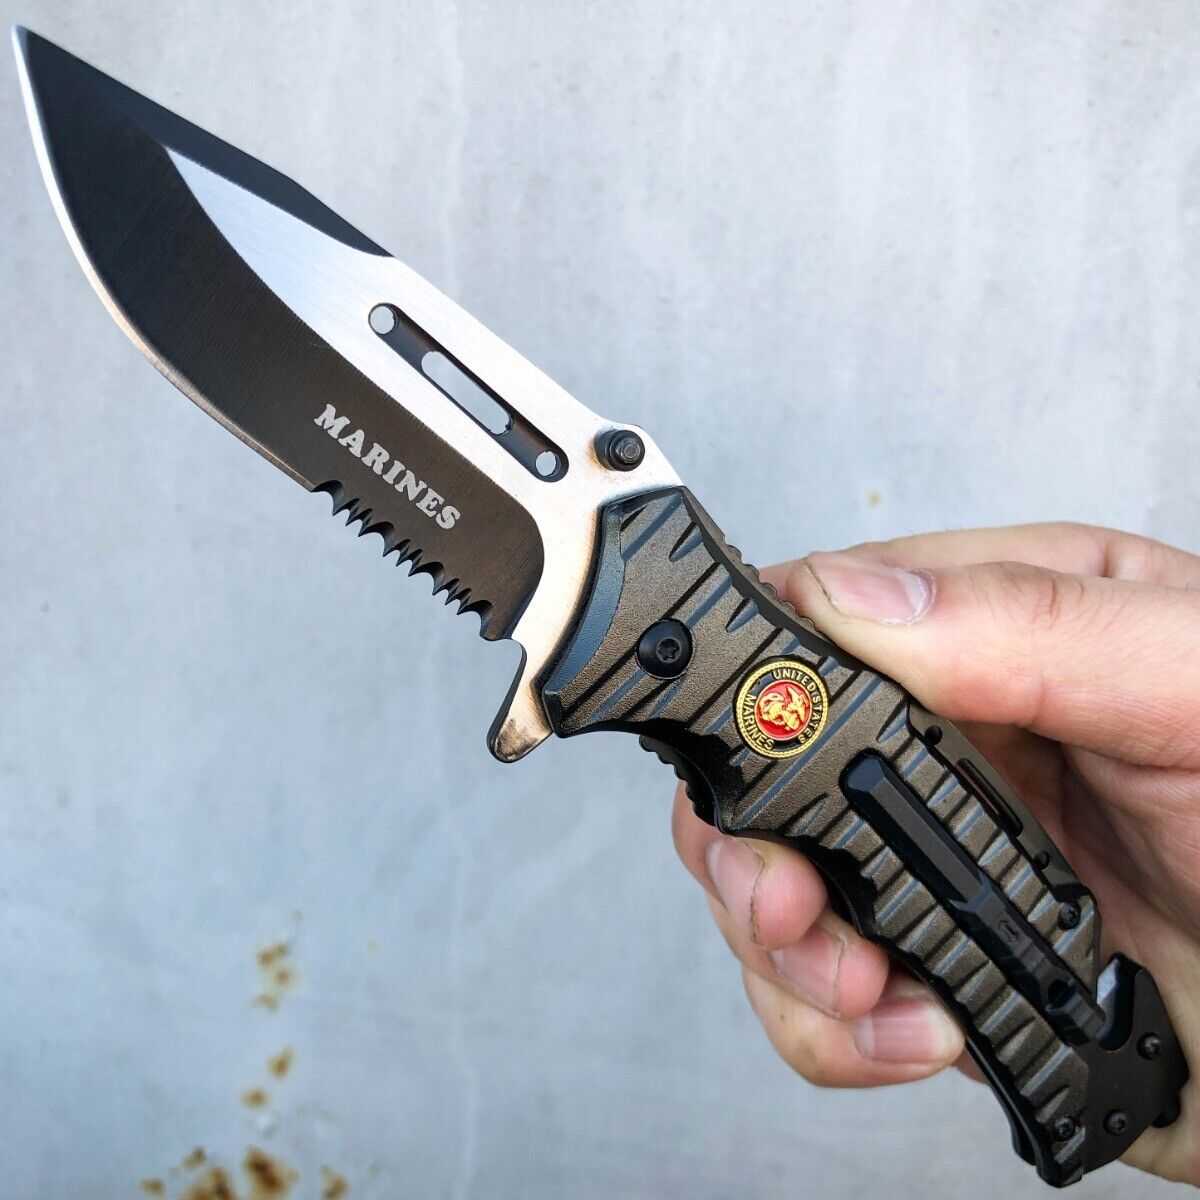 8.25" Military USMC MARINES Assisted Folding Rescue Pocket Knife Multi Tool NEW Defender Does Not Apply